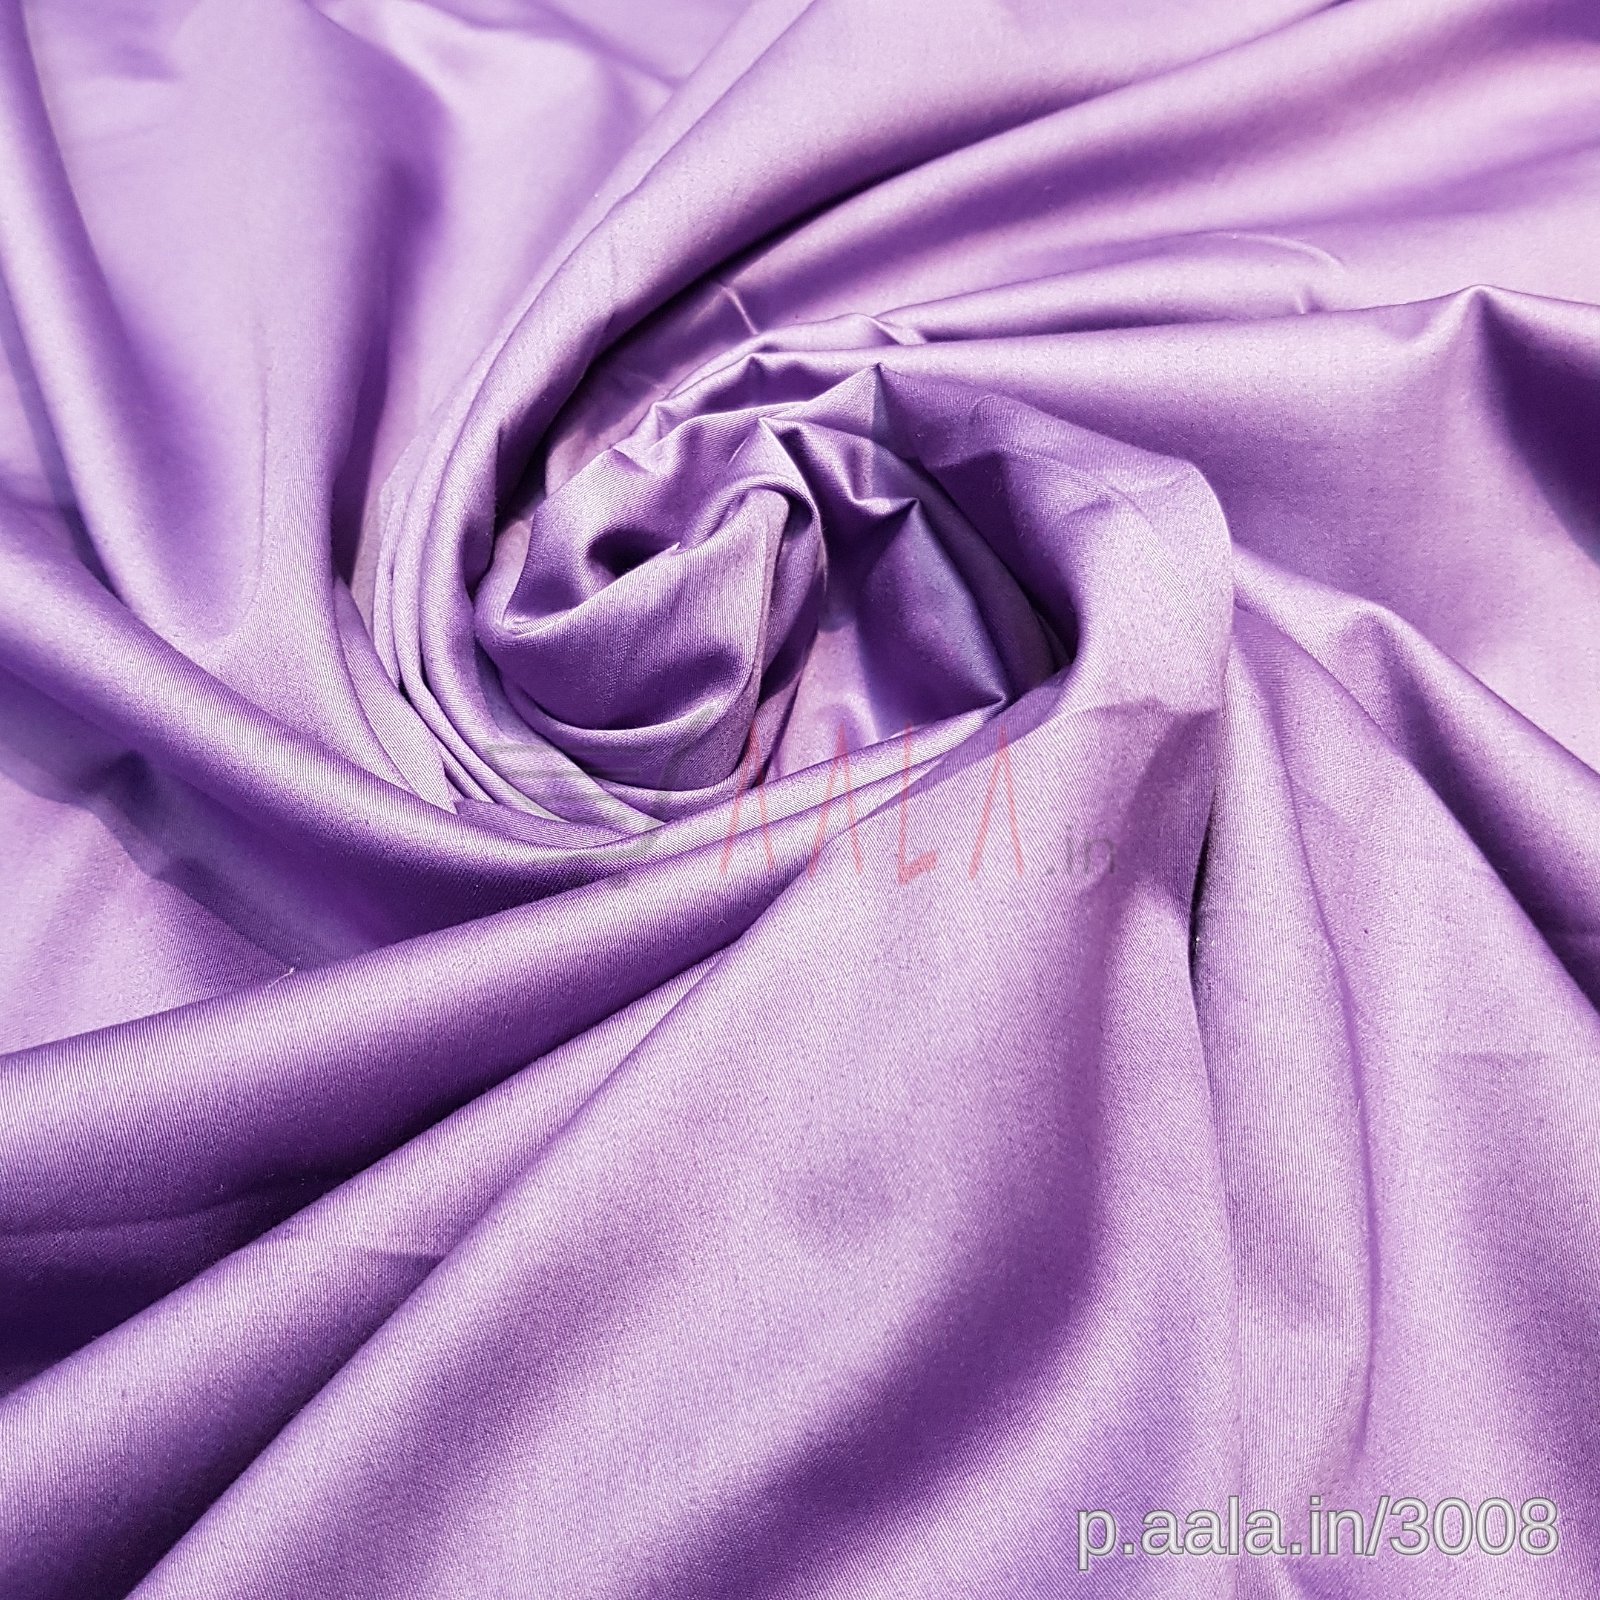 Satin Cotton 44 Inches Dyed Per Metre #3008